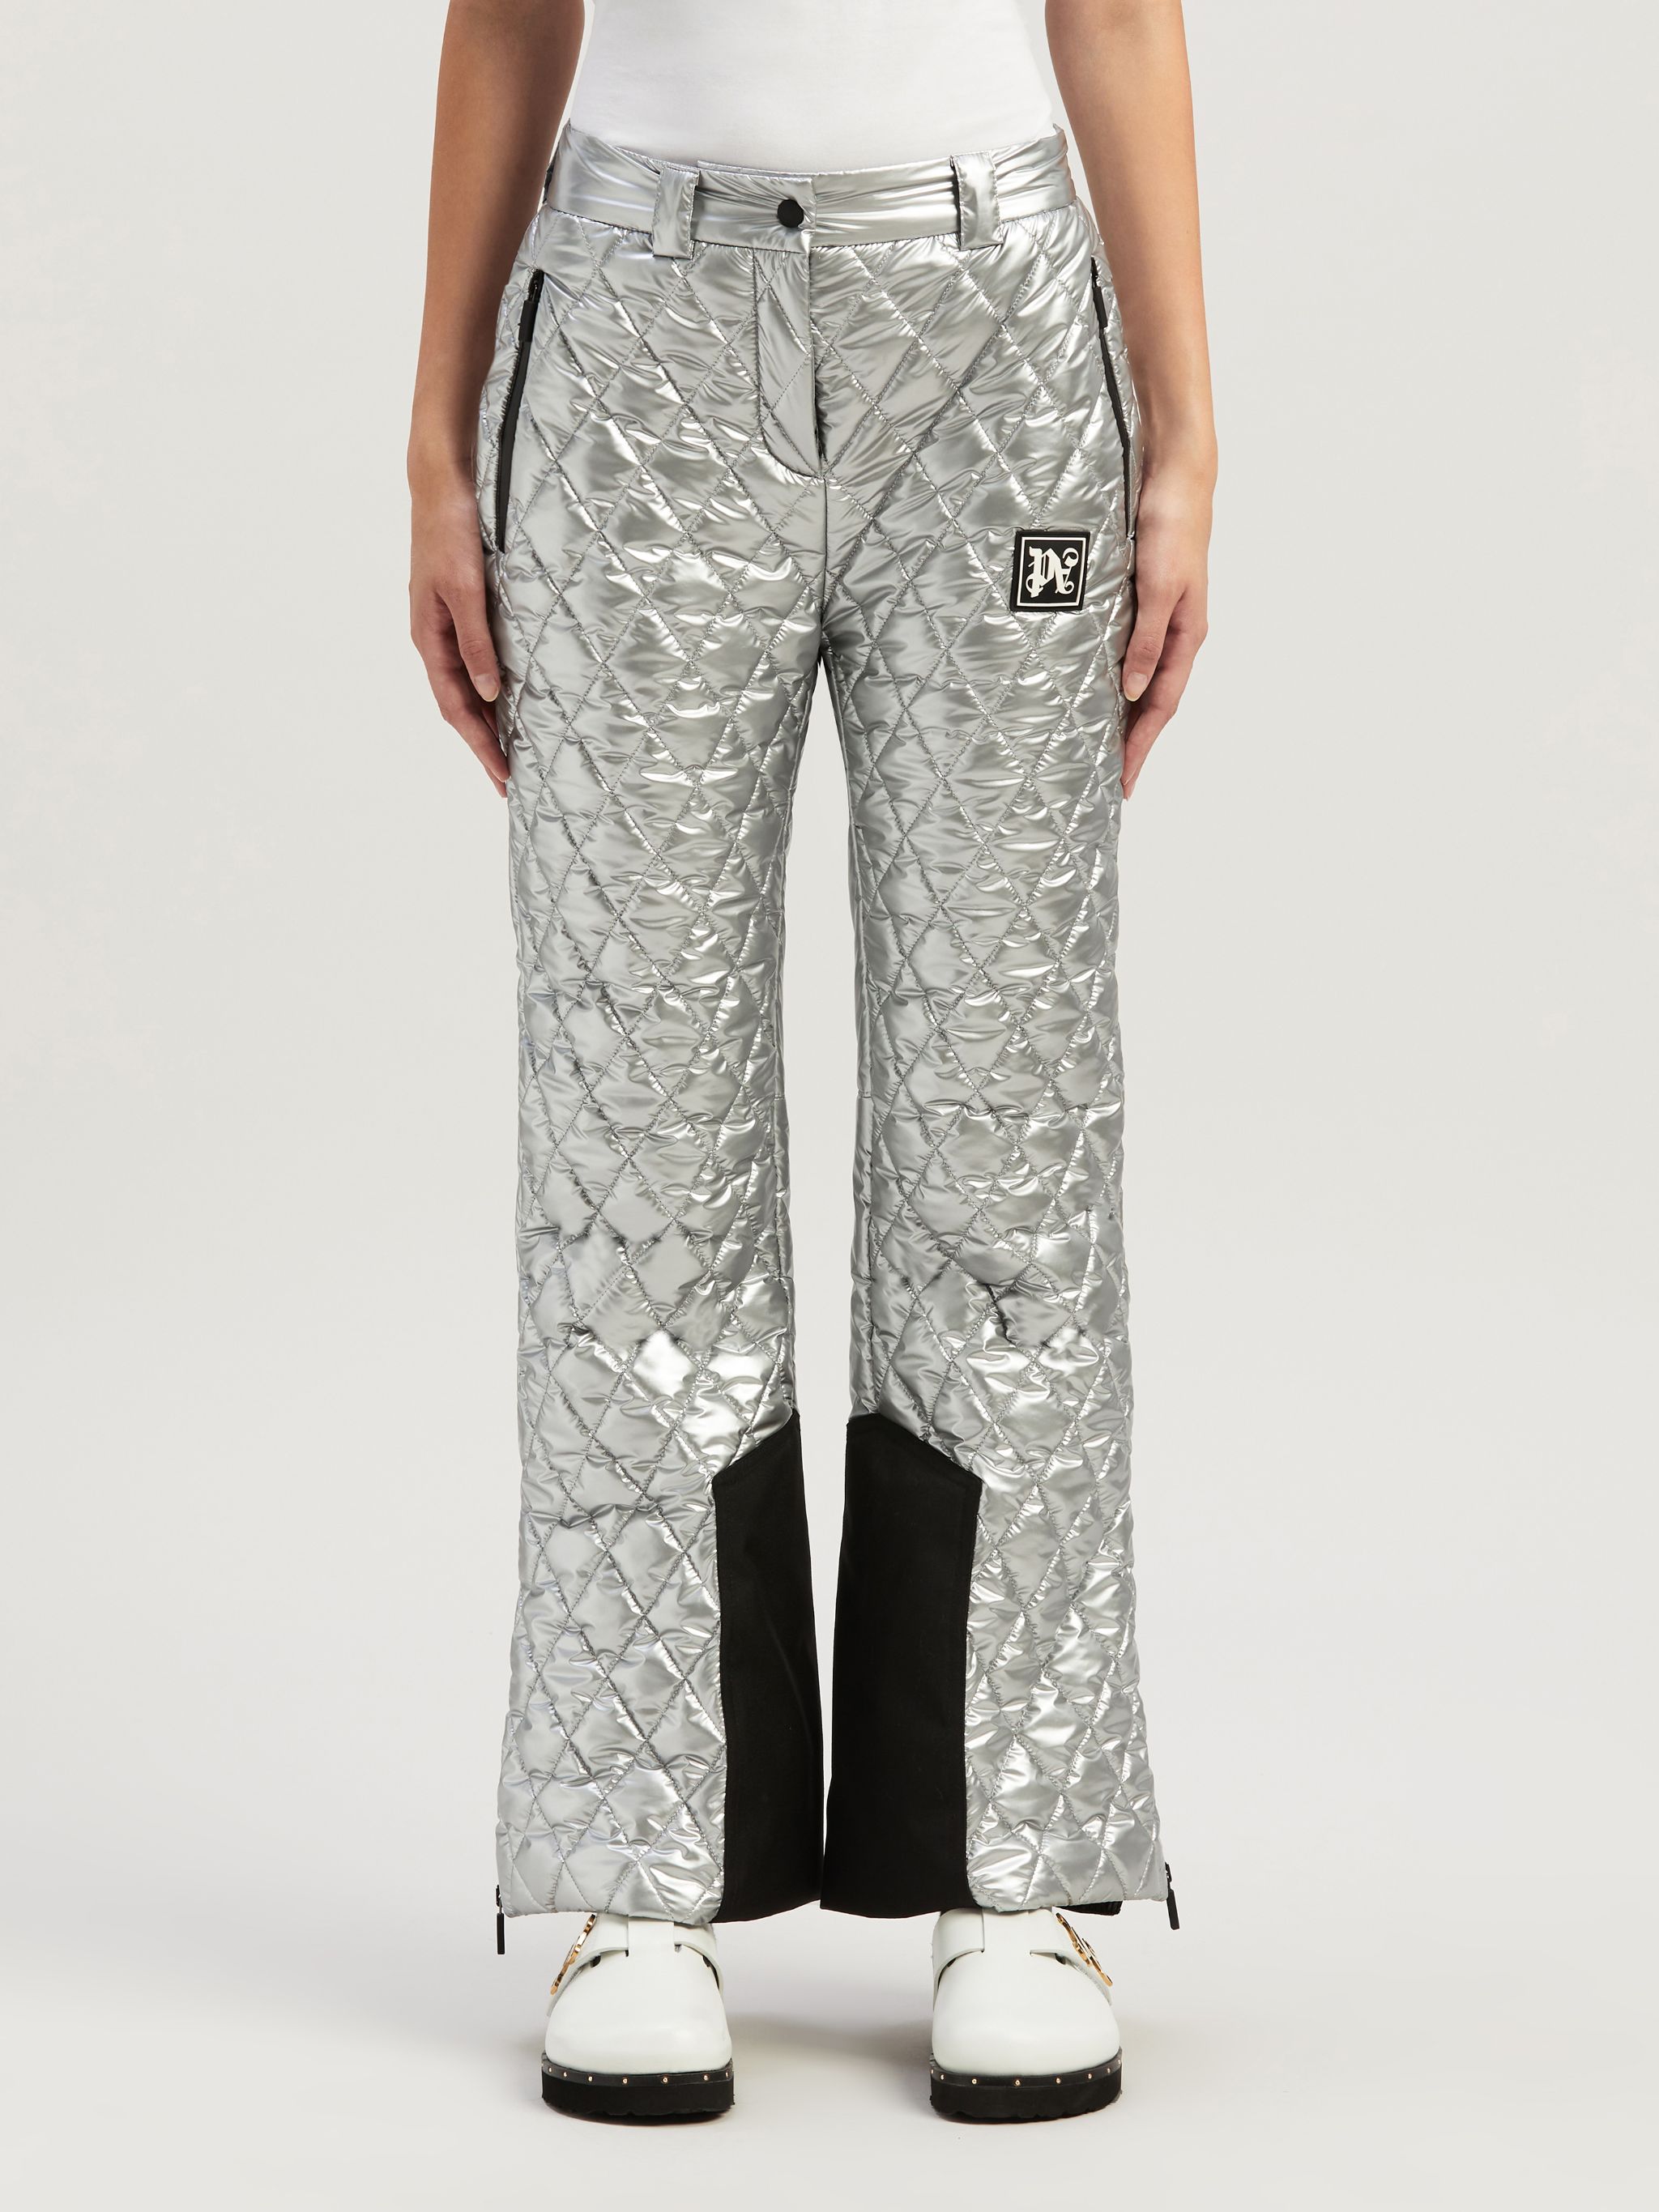 PA Reflective Ski Pants in silver - Palm Angels® Official